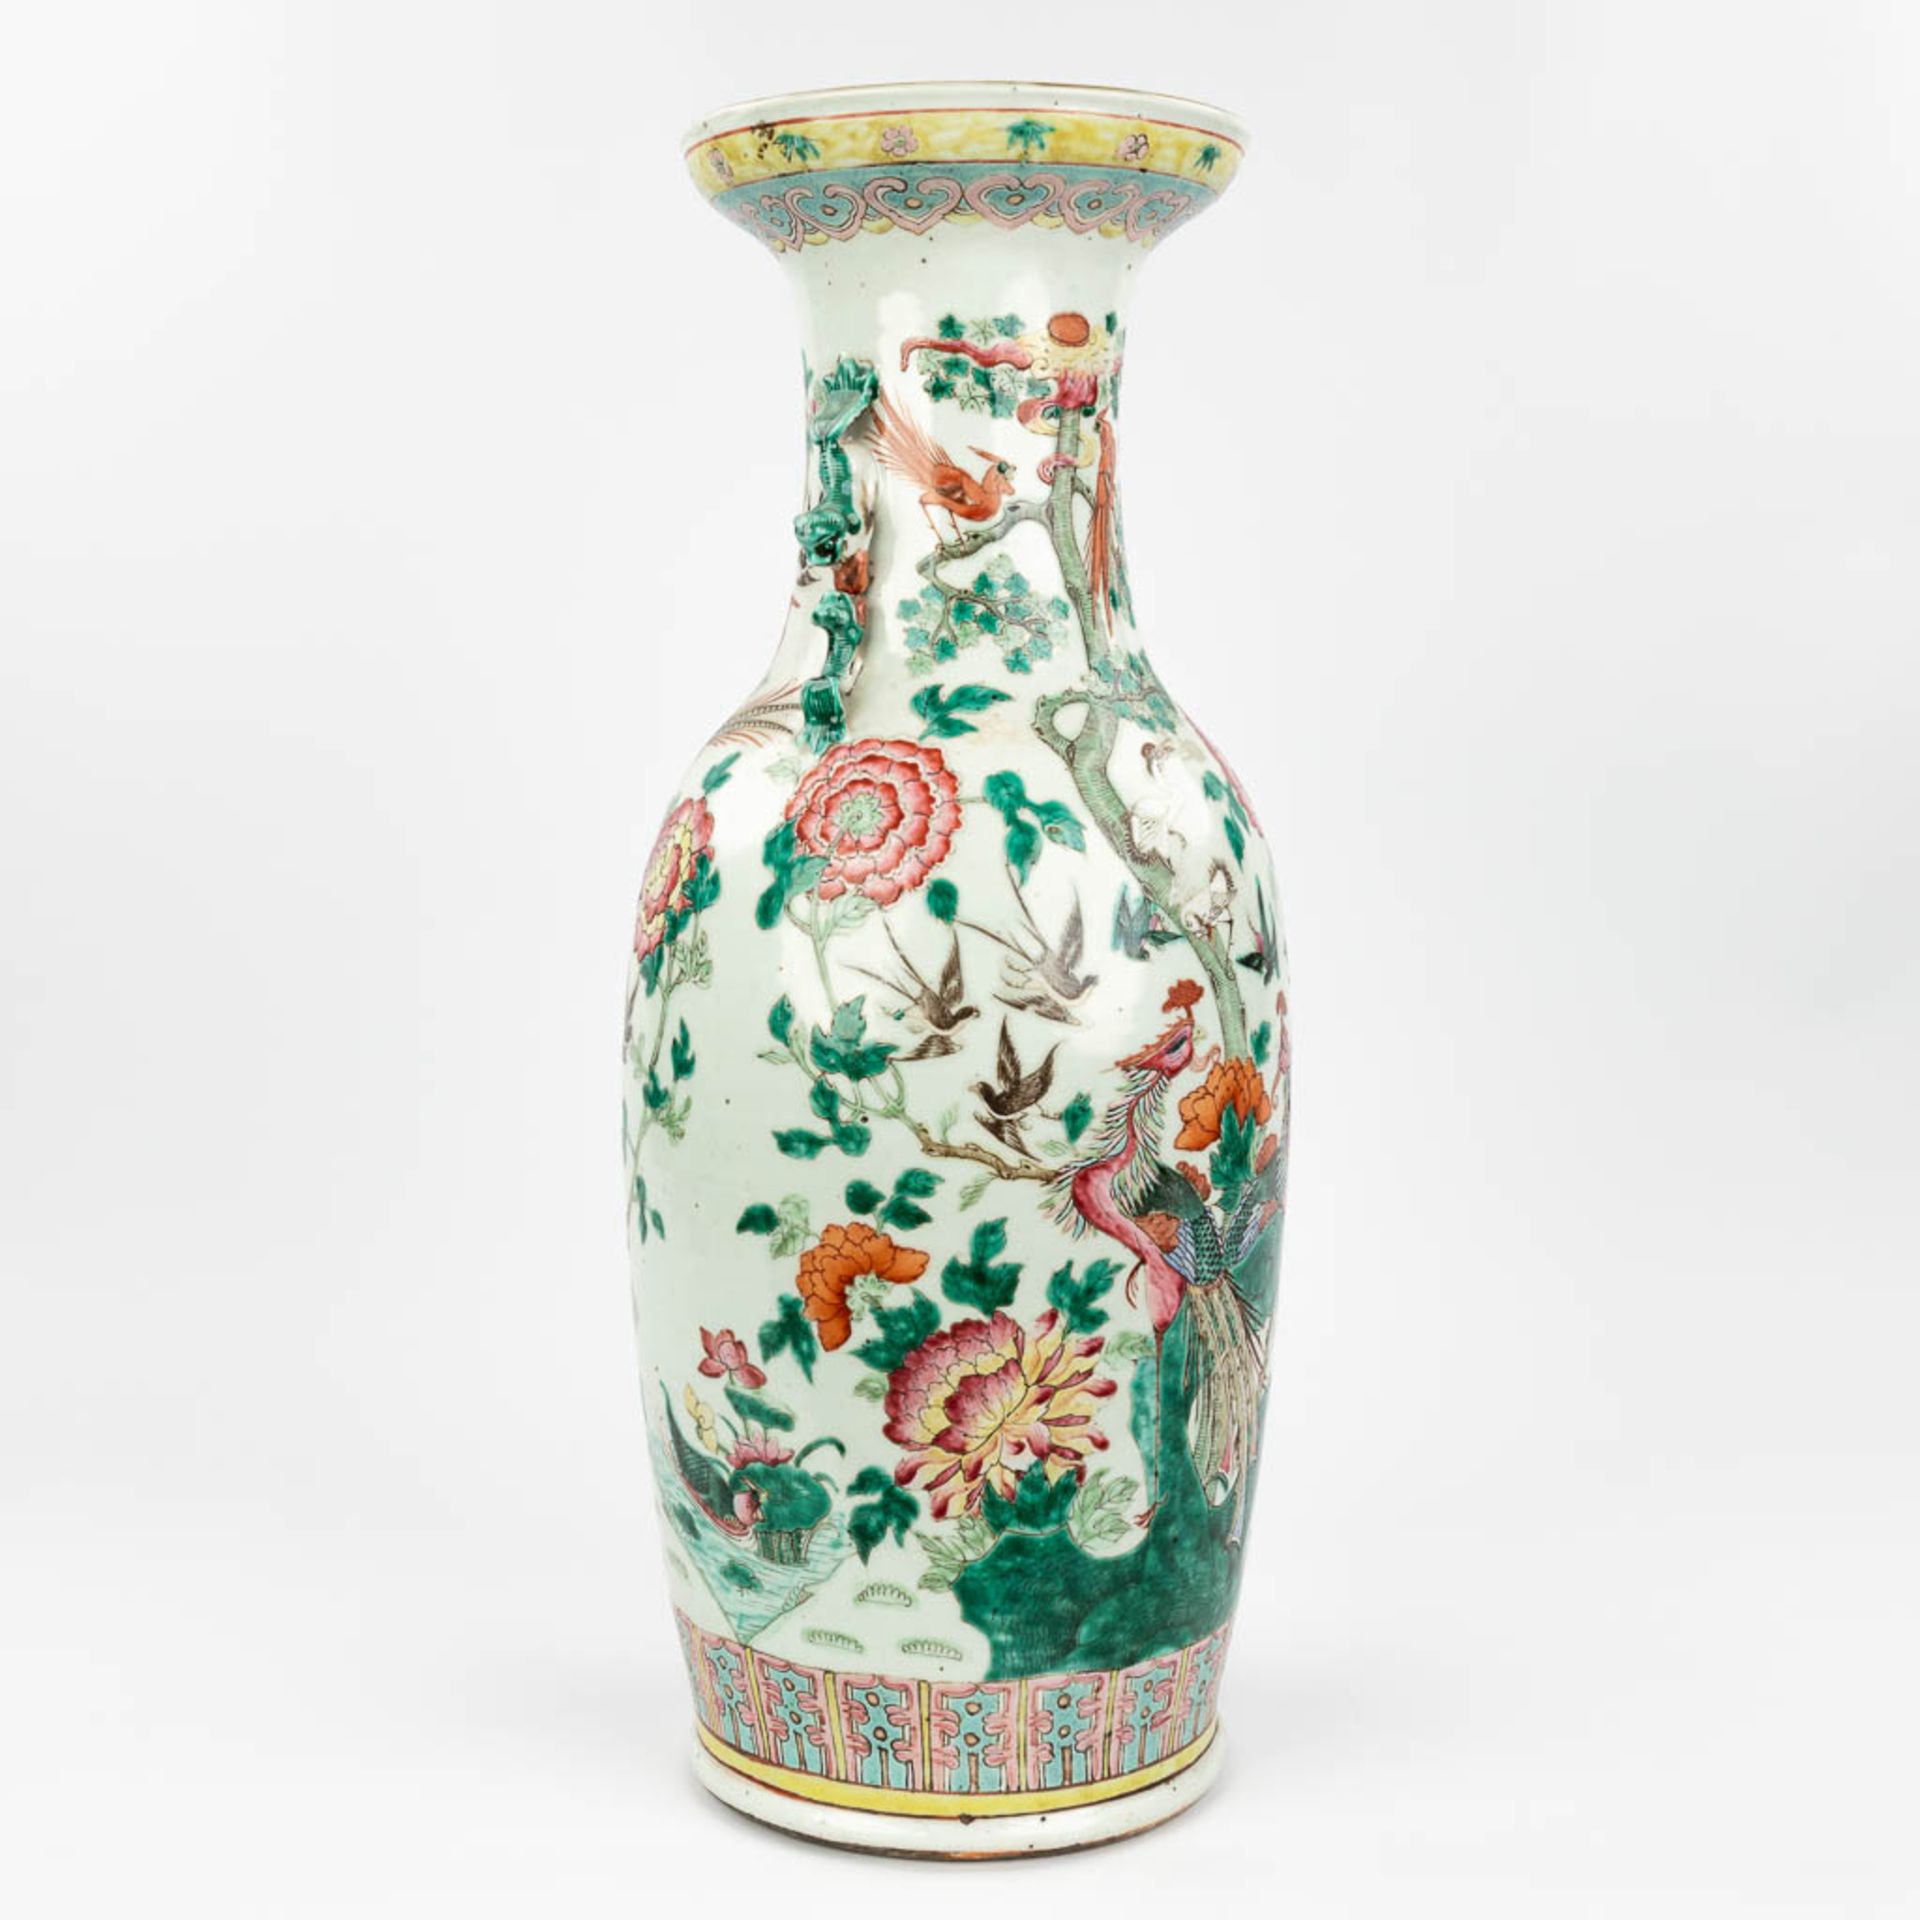 A Chinese vase made of porcelain, decorated with peacocks and birds. (61,5 x 24 cm) - Image 9 of 18